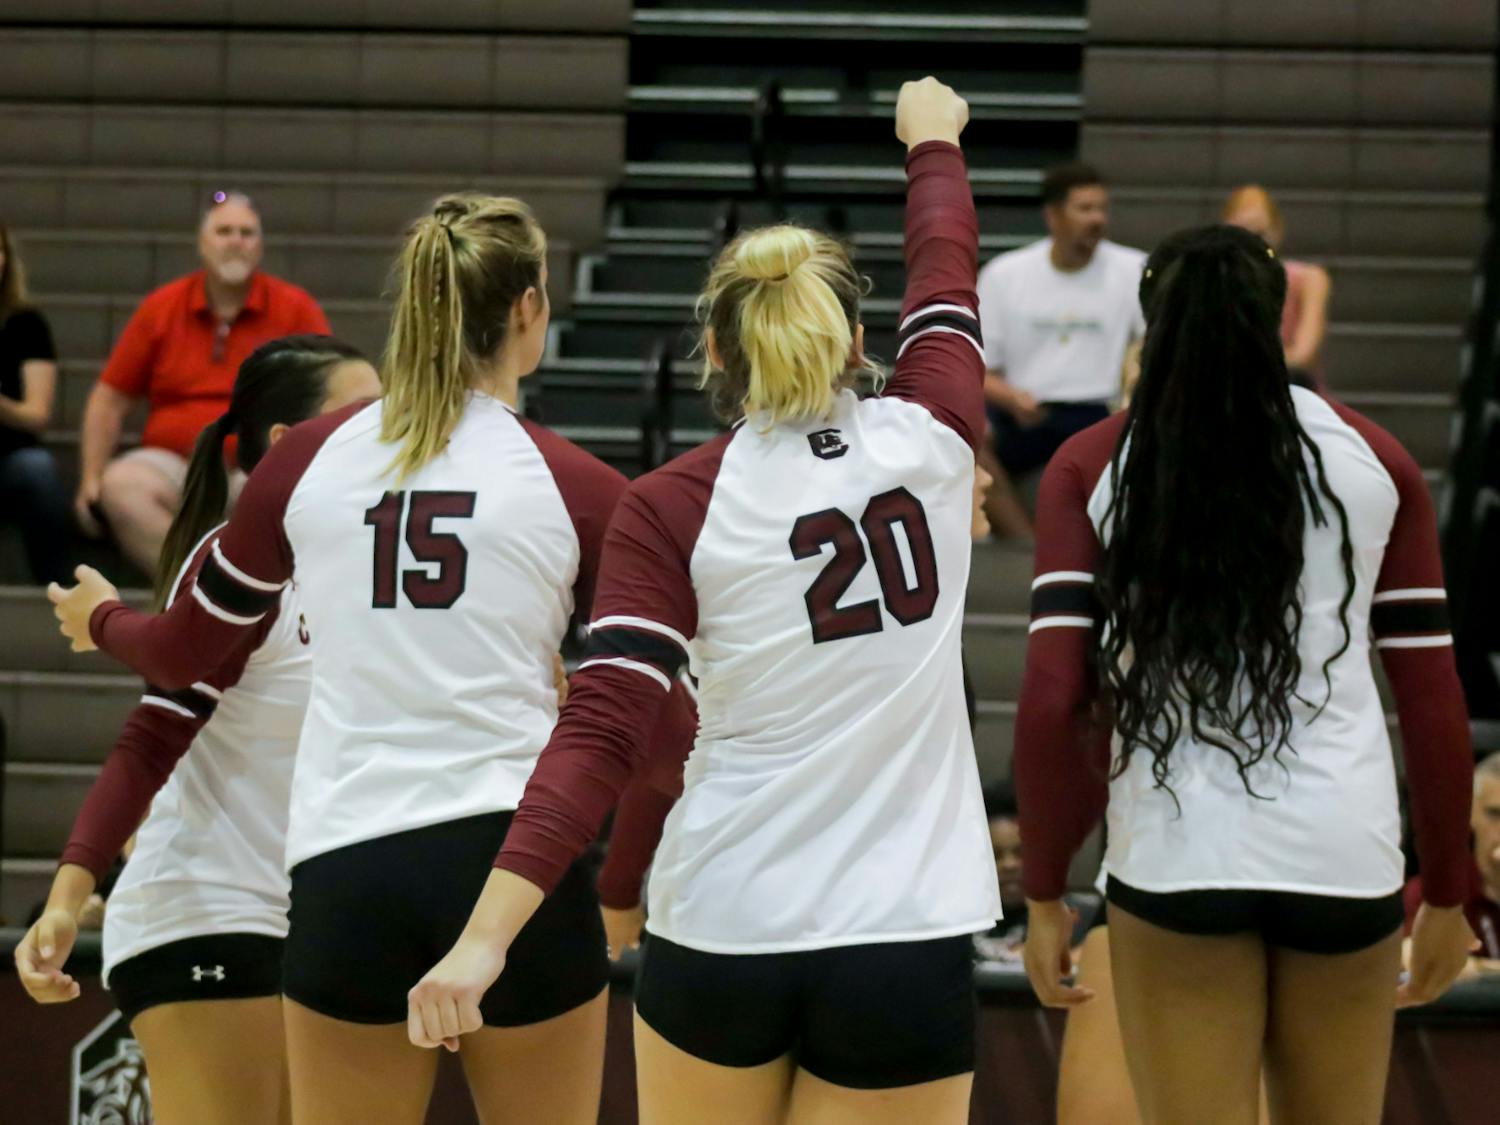 The South Carolina volleyball team celebrates after scoring a point against Sacred Heart on Friday, Aug. 26, 2022.&nbsp;